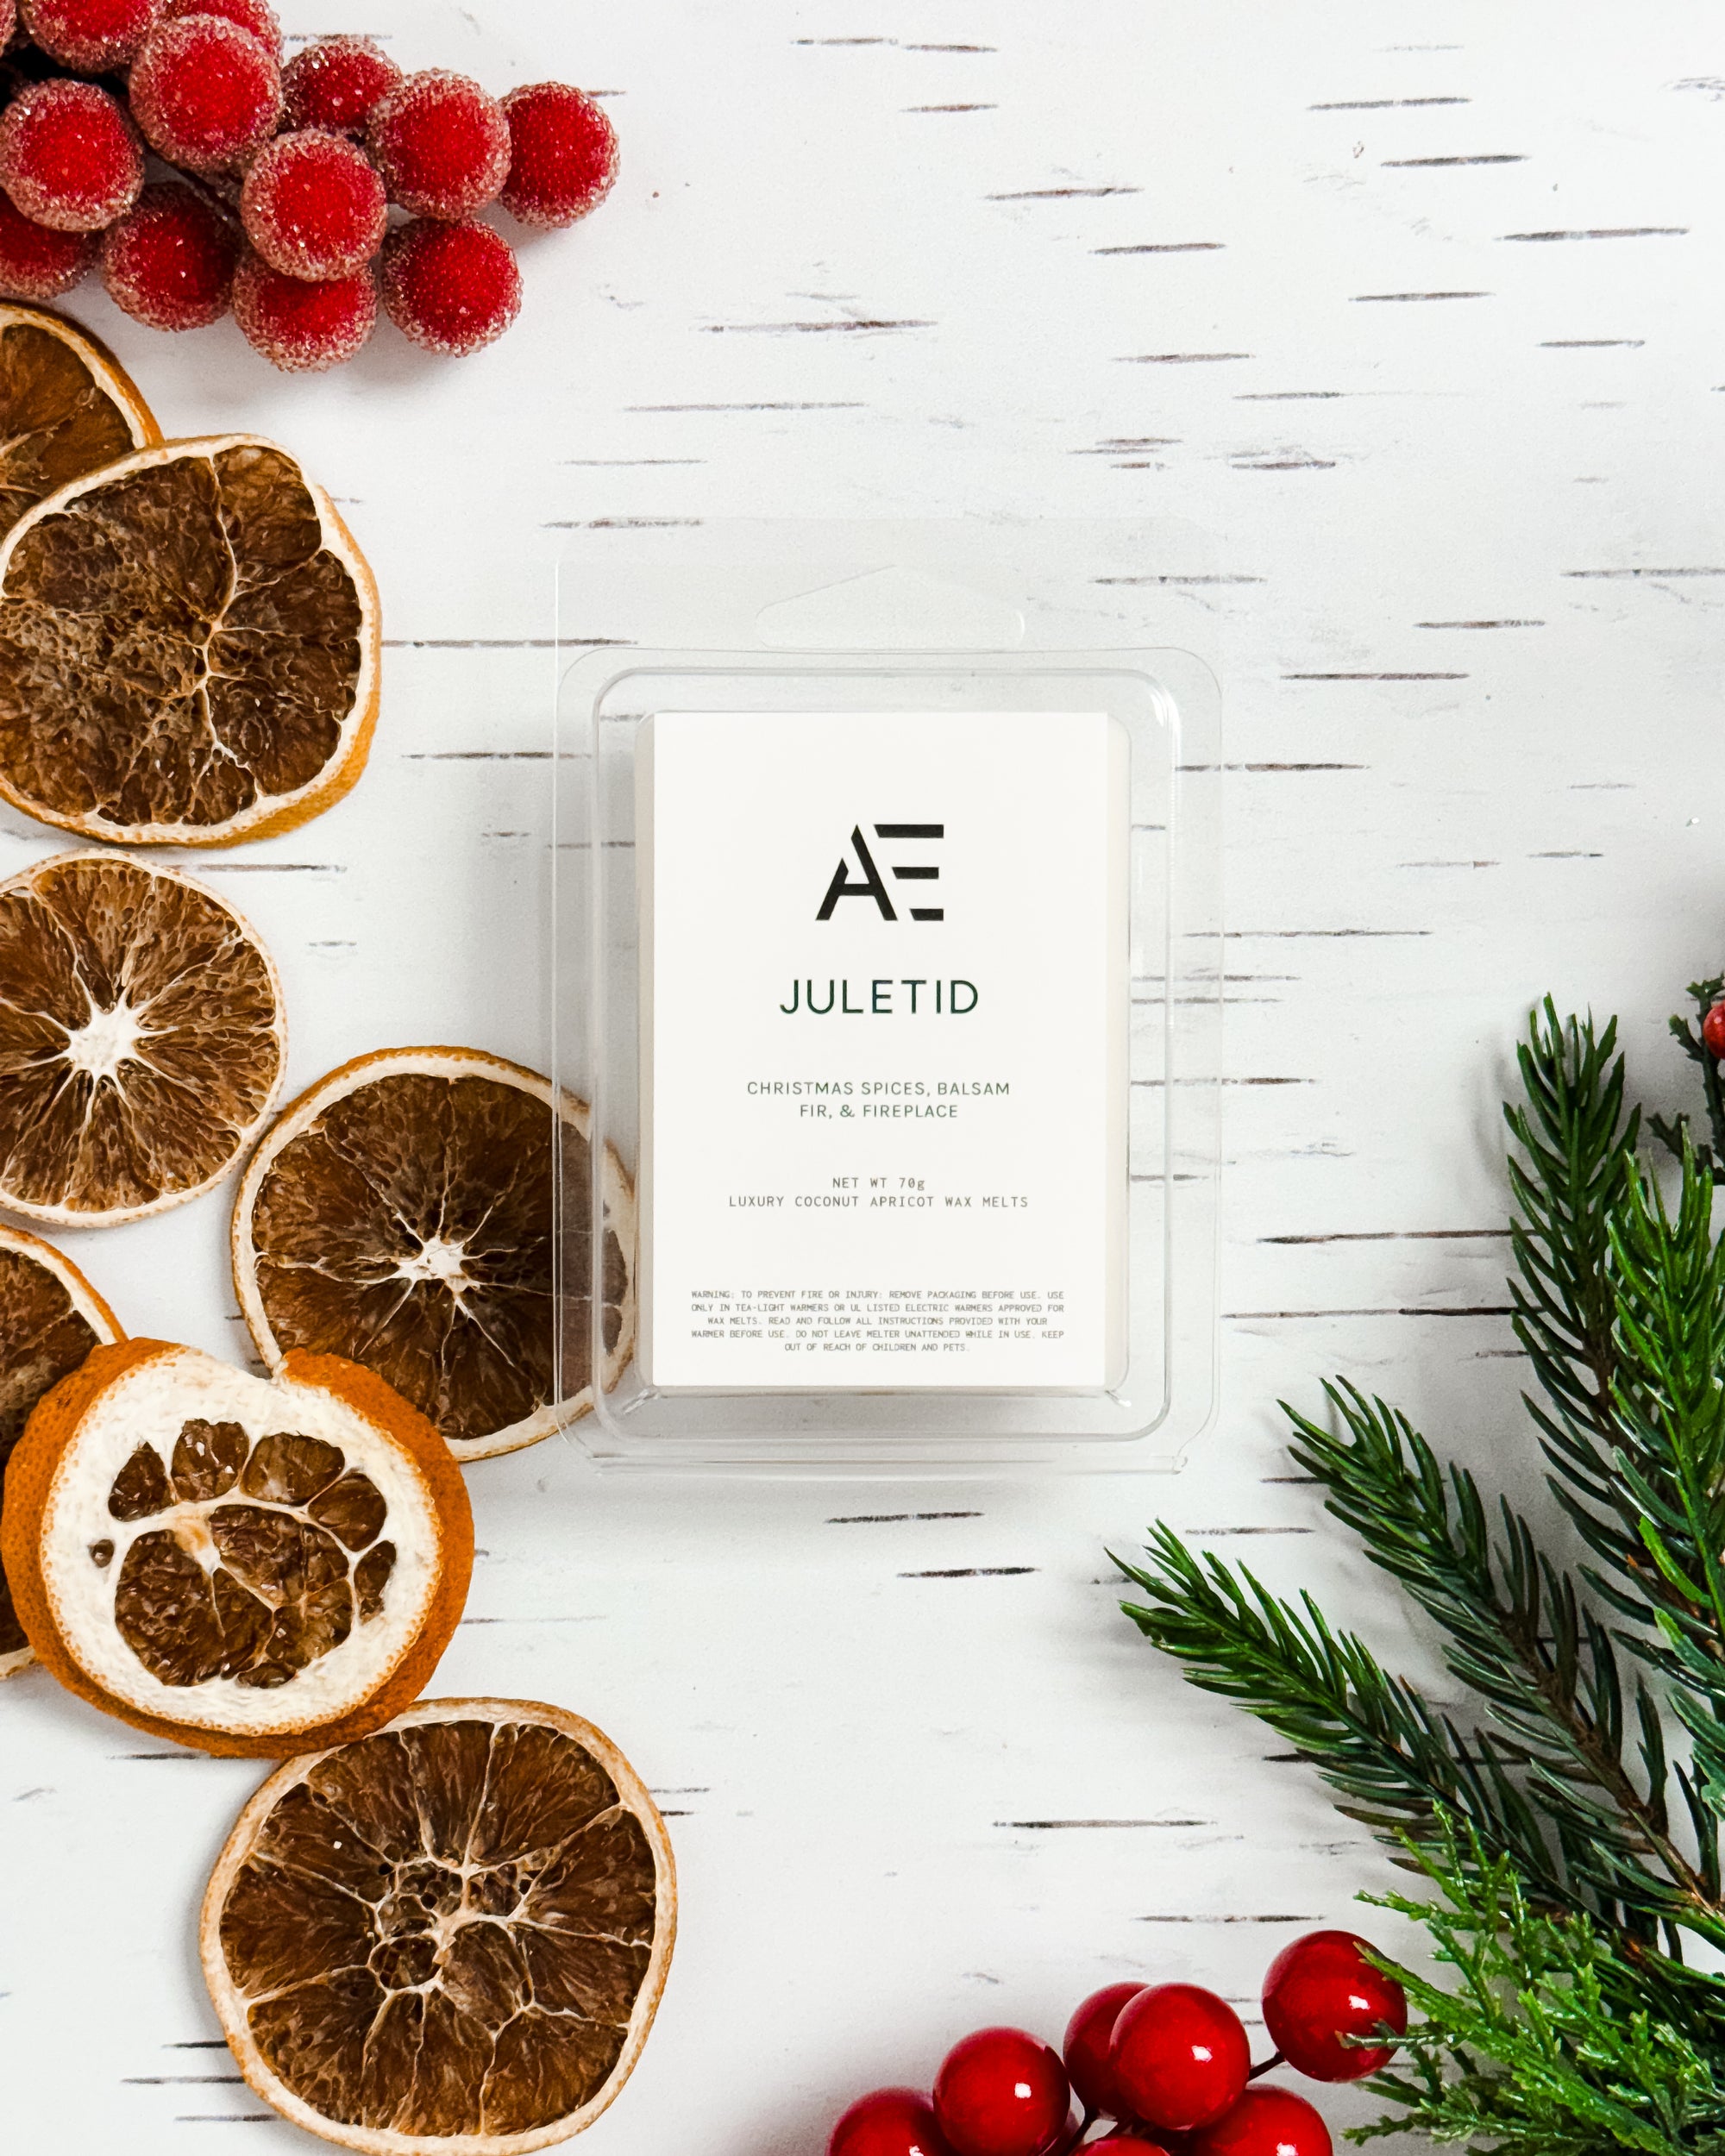 JULETID - Wax Melt - AEMBR - Clean Luxury Candles, Wax Melts & Laundry Care